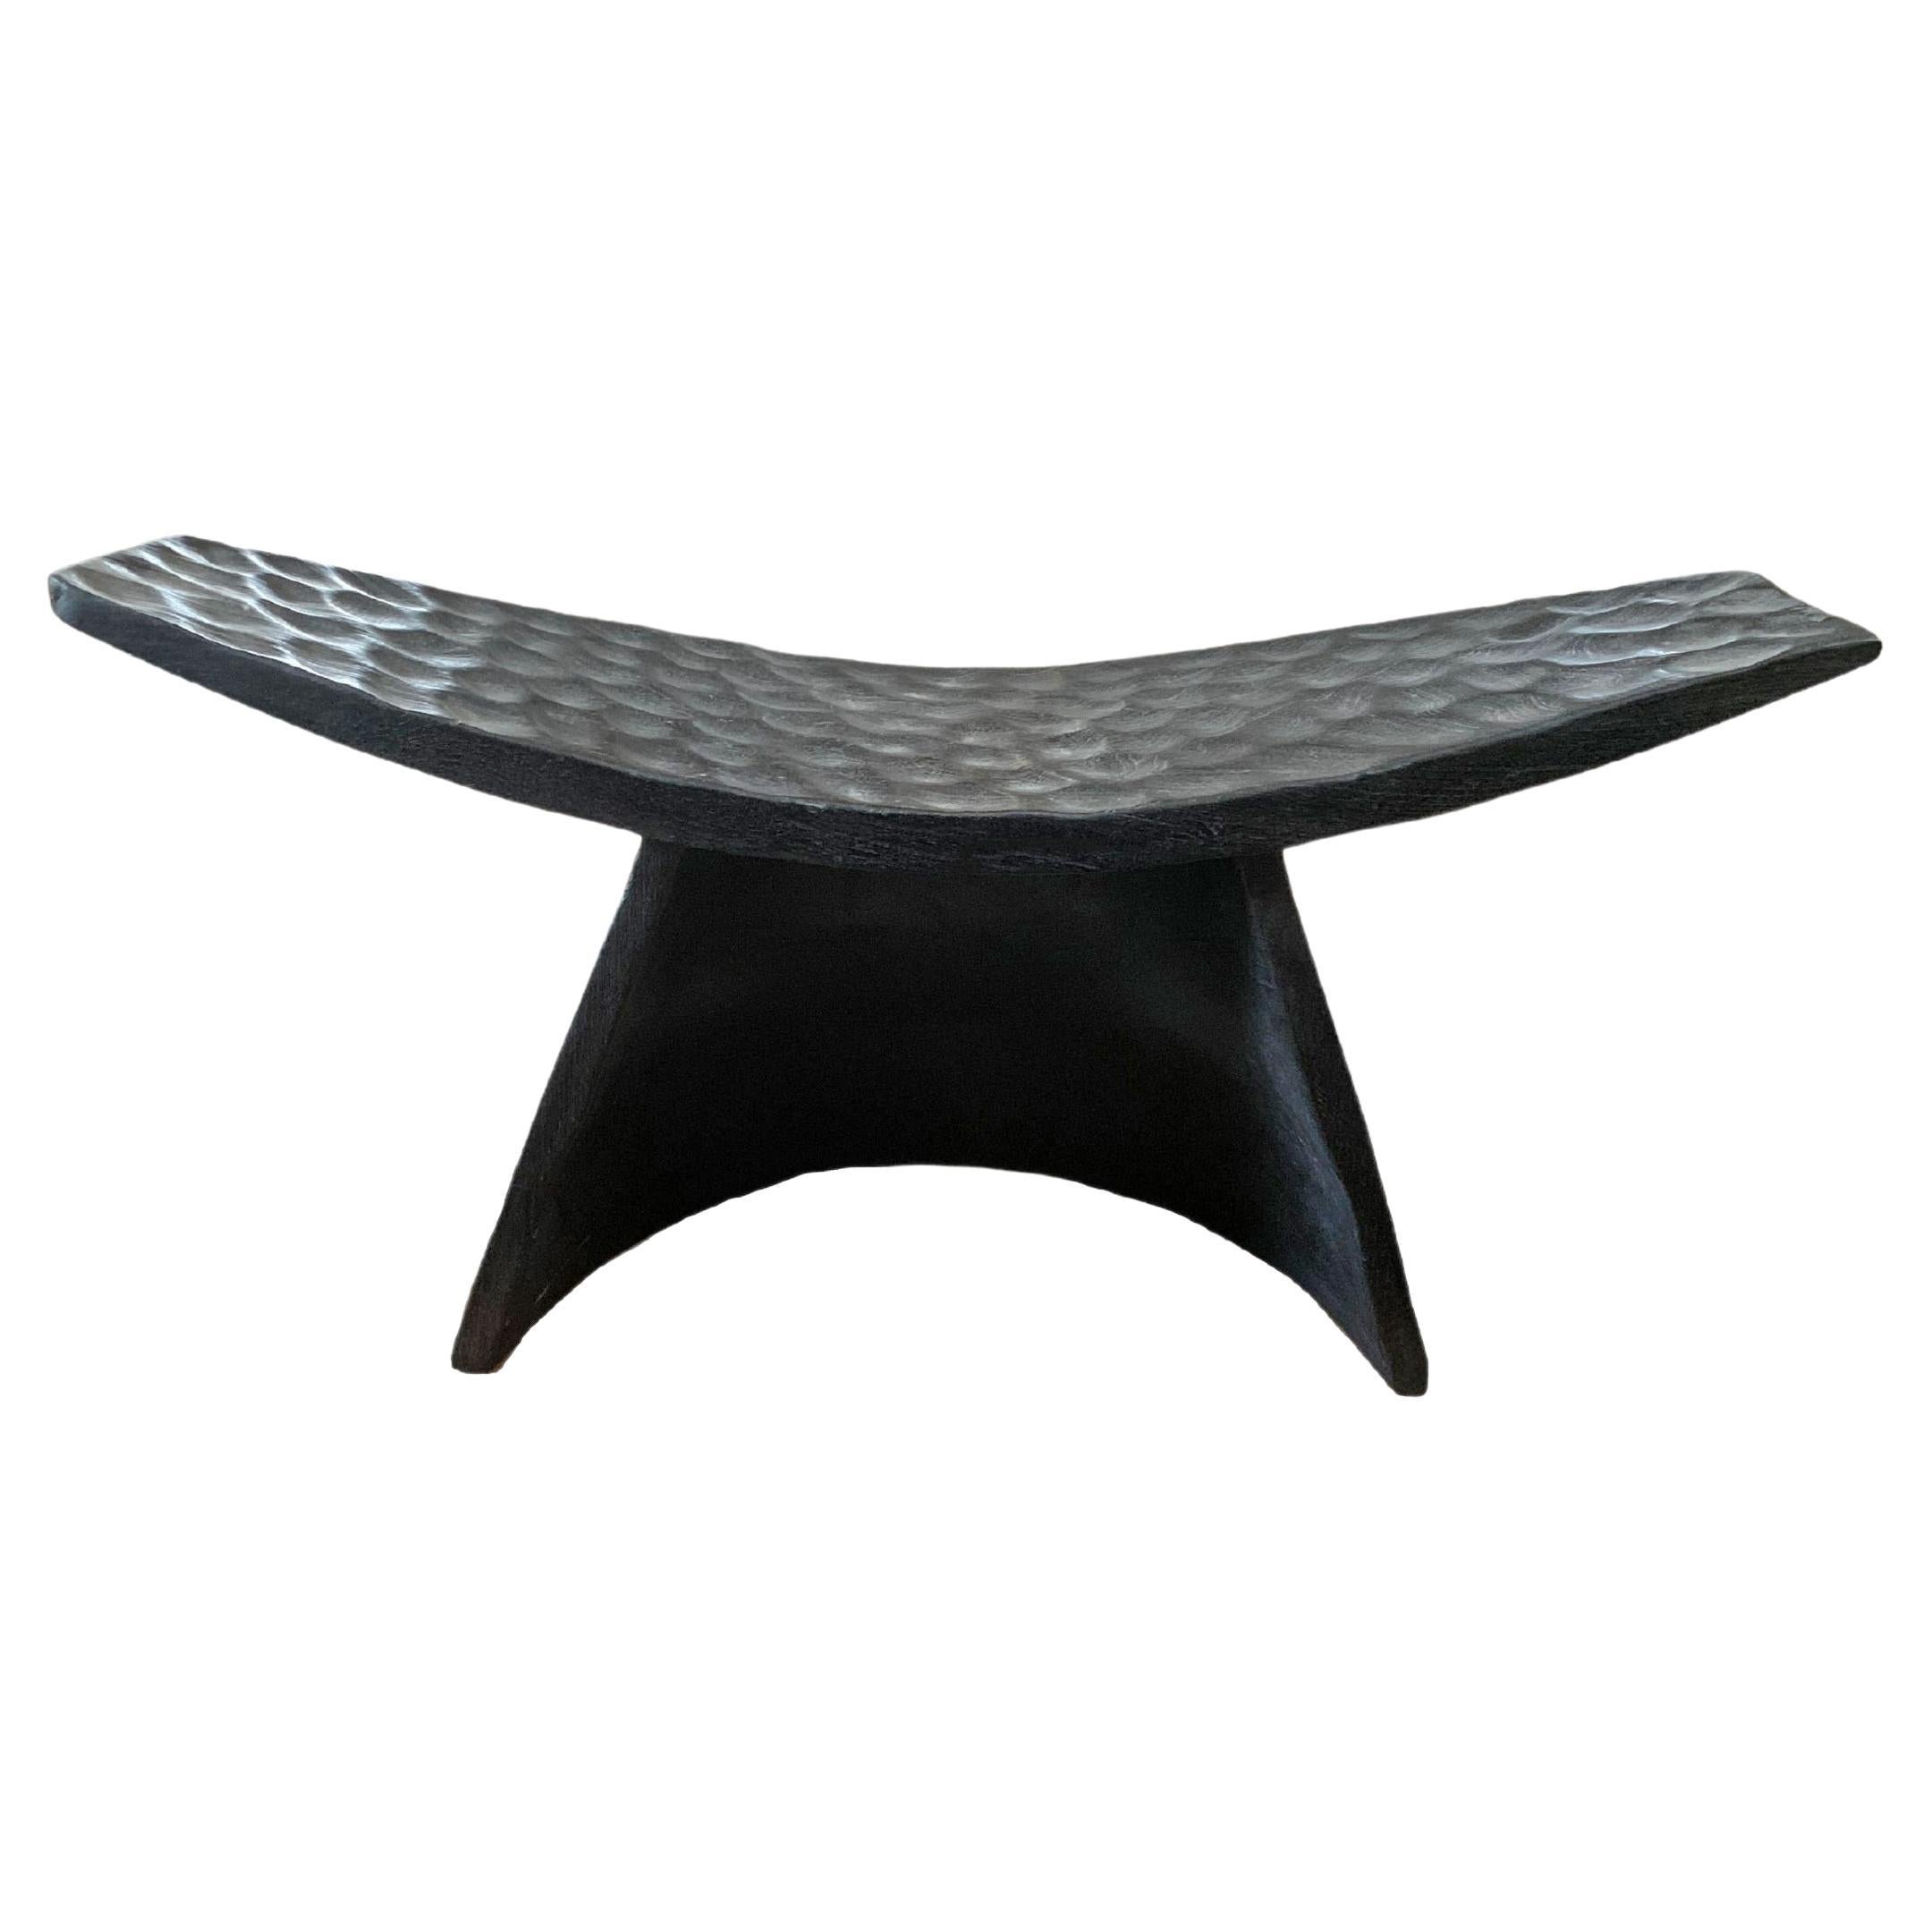 Sculptural Stool with Curved Seat & Hand Hewn Detailing, Burnt Finish